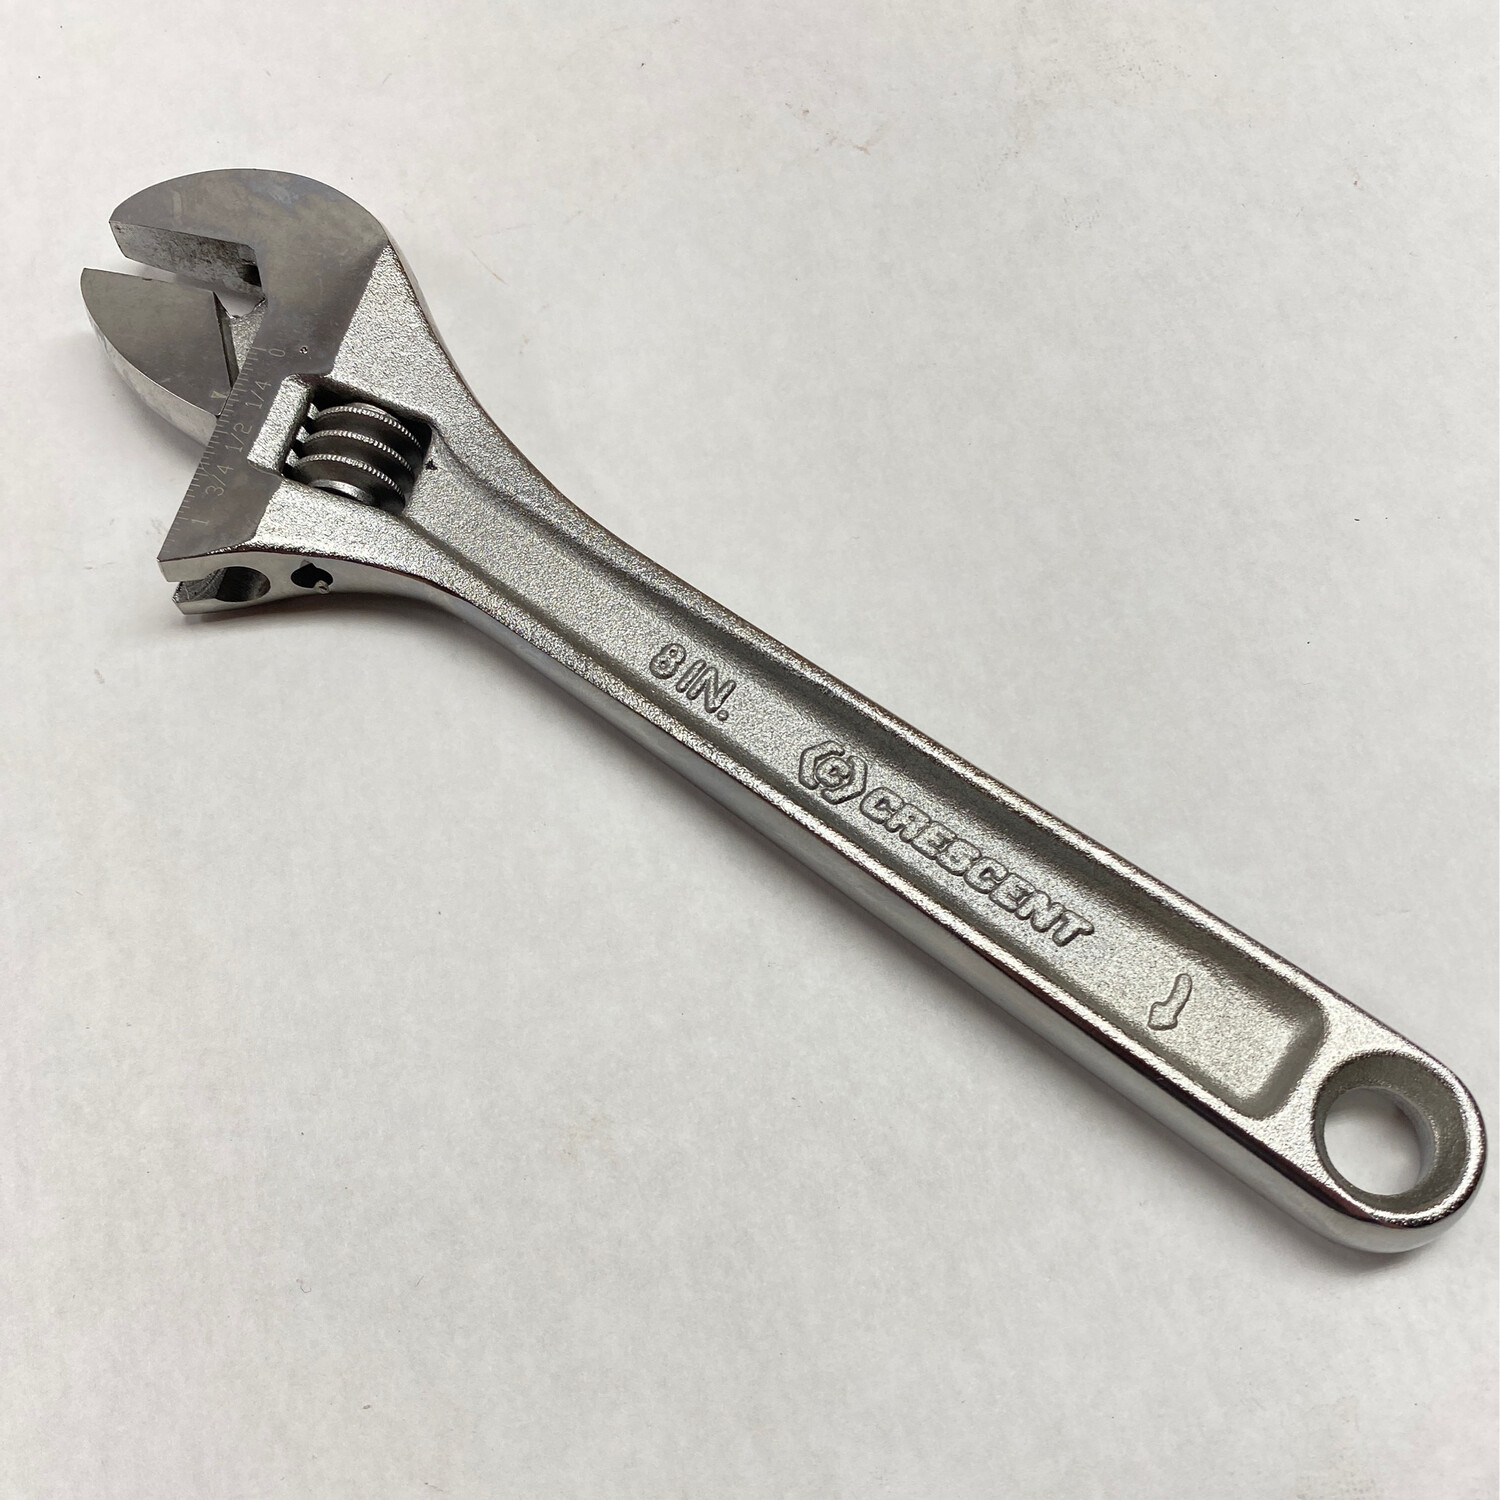 Crescent 8” Adjustable Wrench